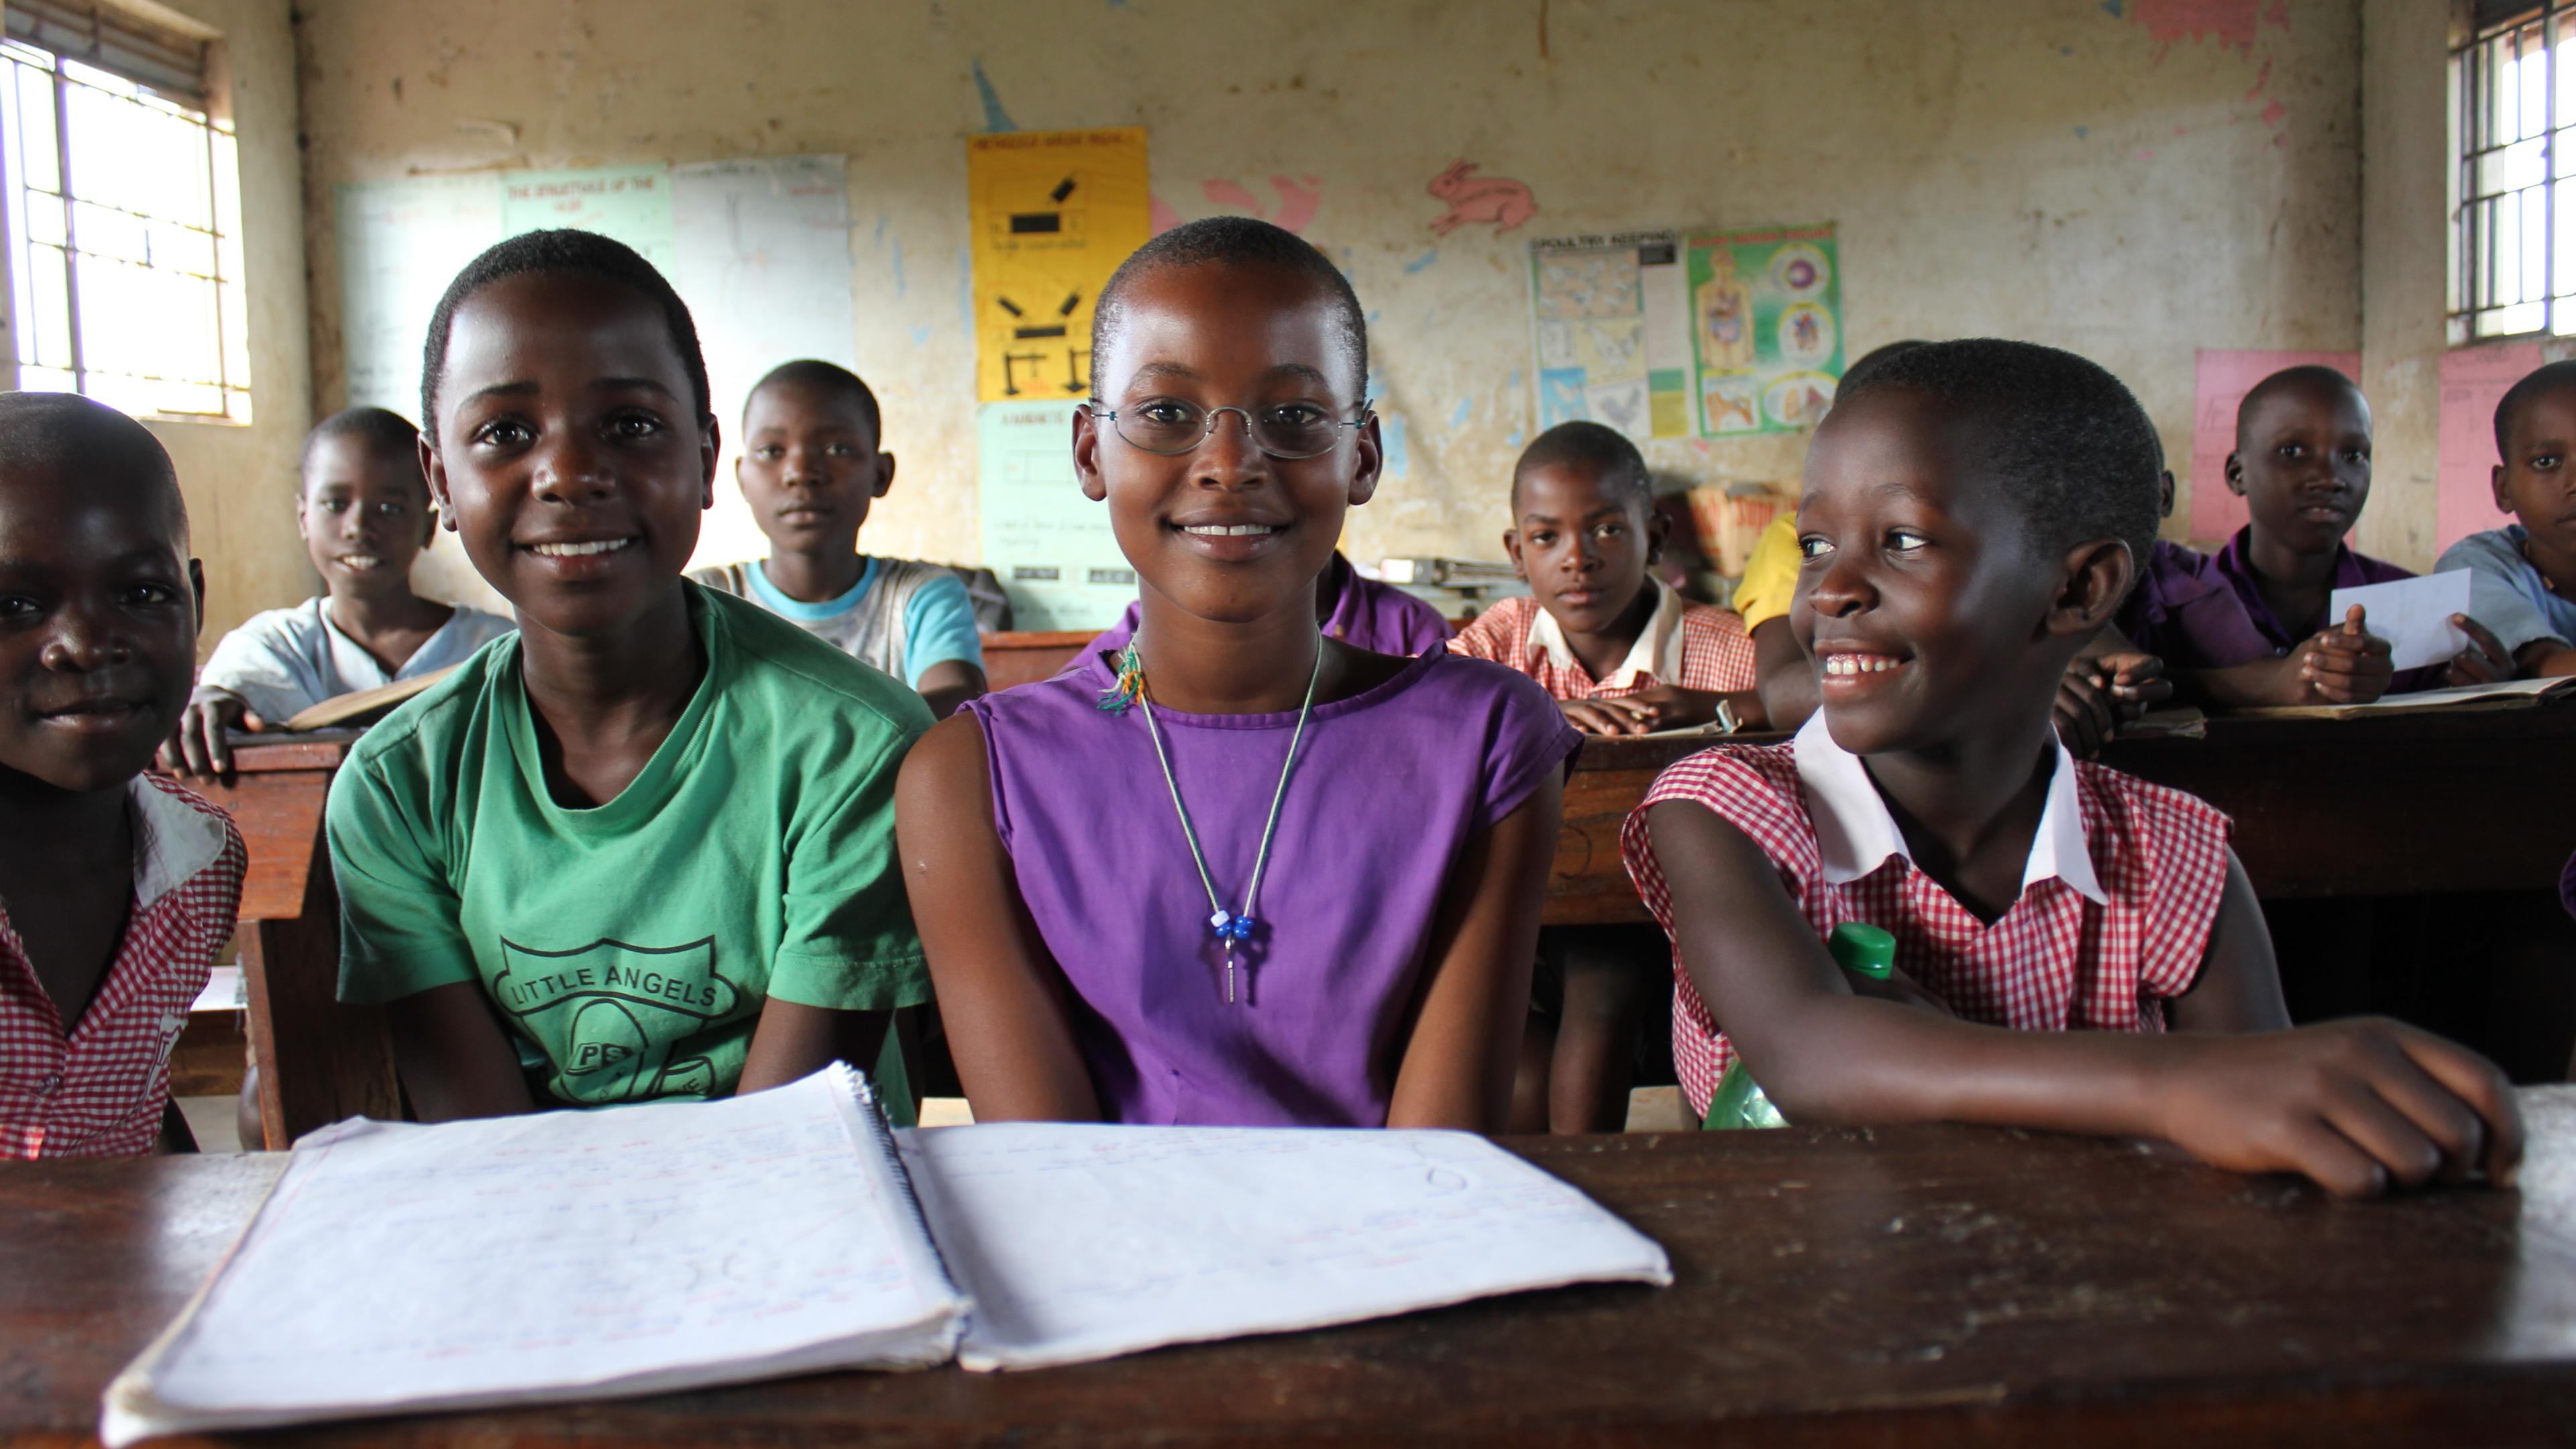 Pupils from Uganda in the classroom, one wearing OneDollarGlasses